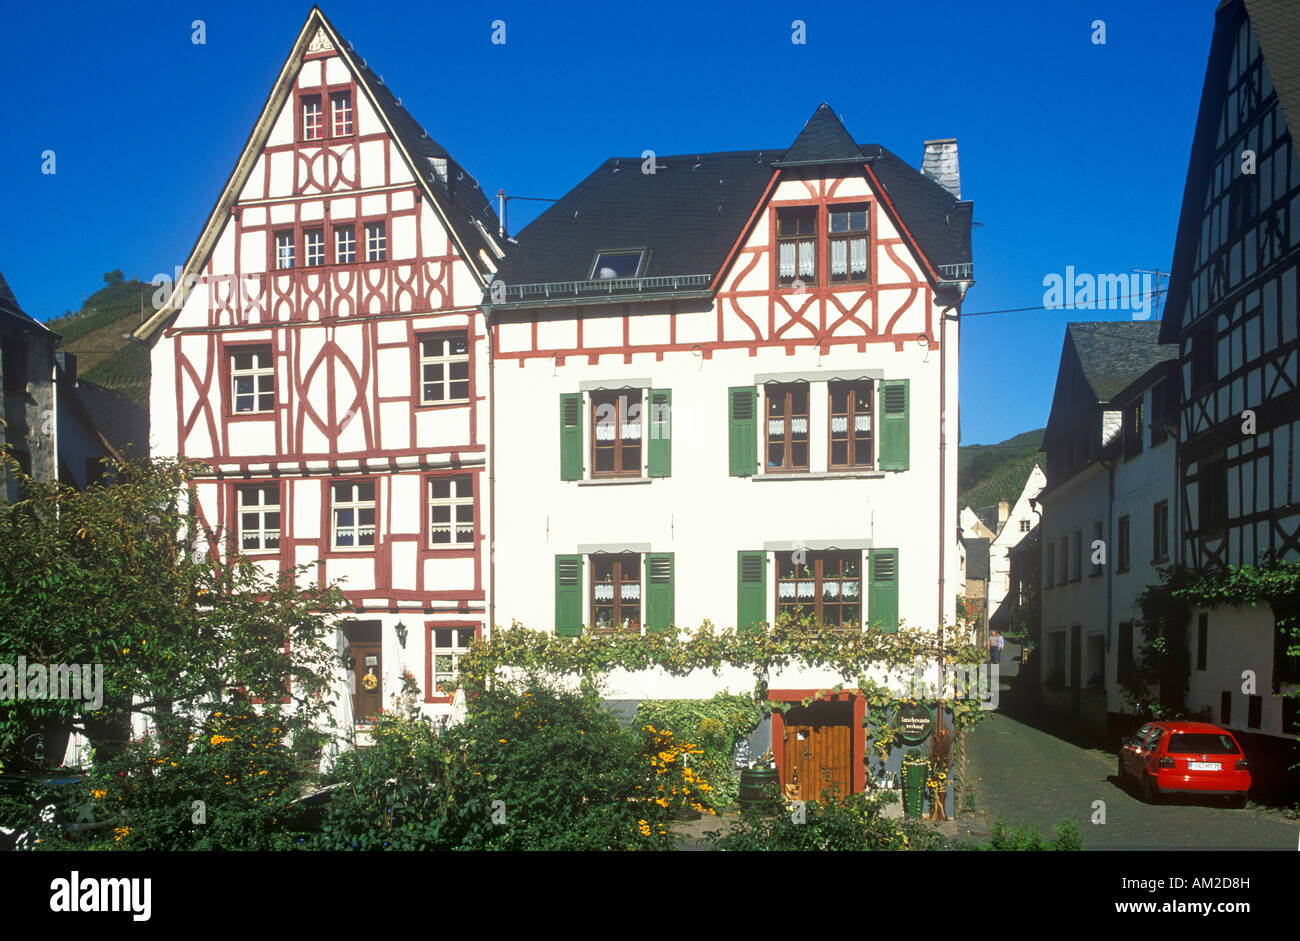 half-timbered houses at Moselkrampen in the River Moselle Valley in Germany Stock Photo